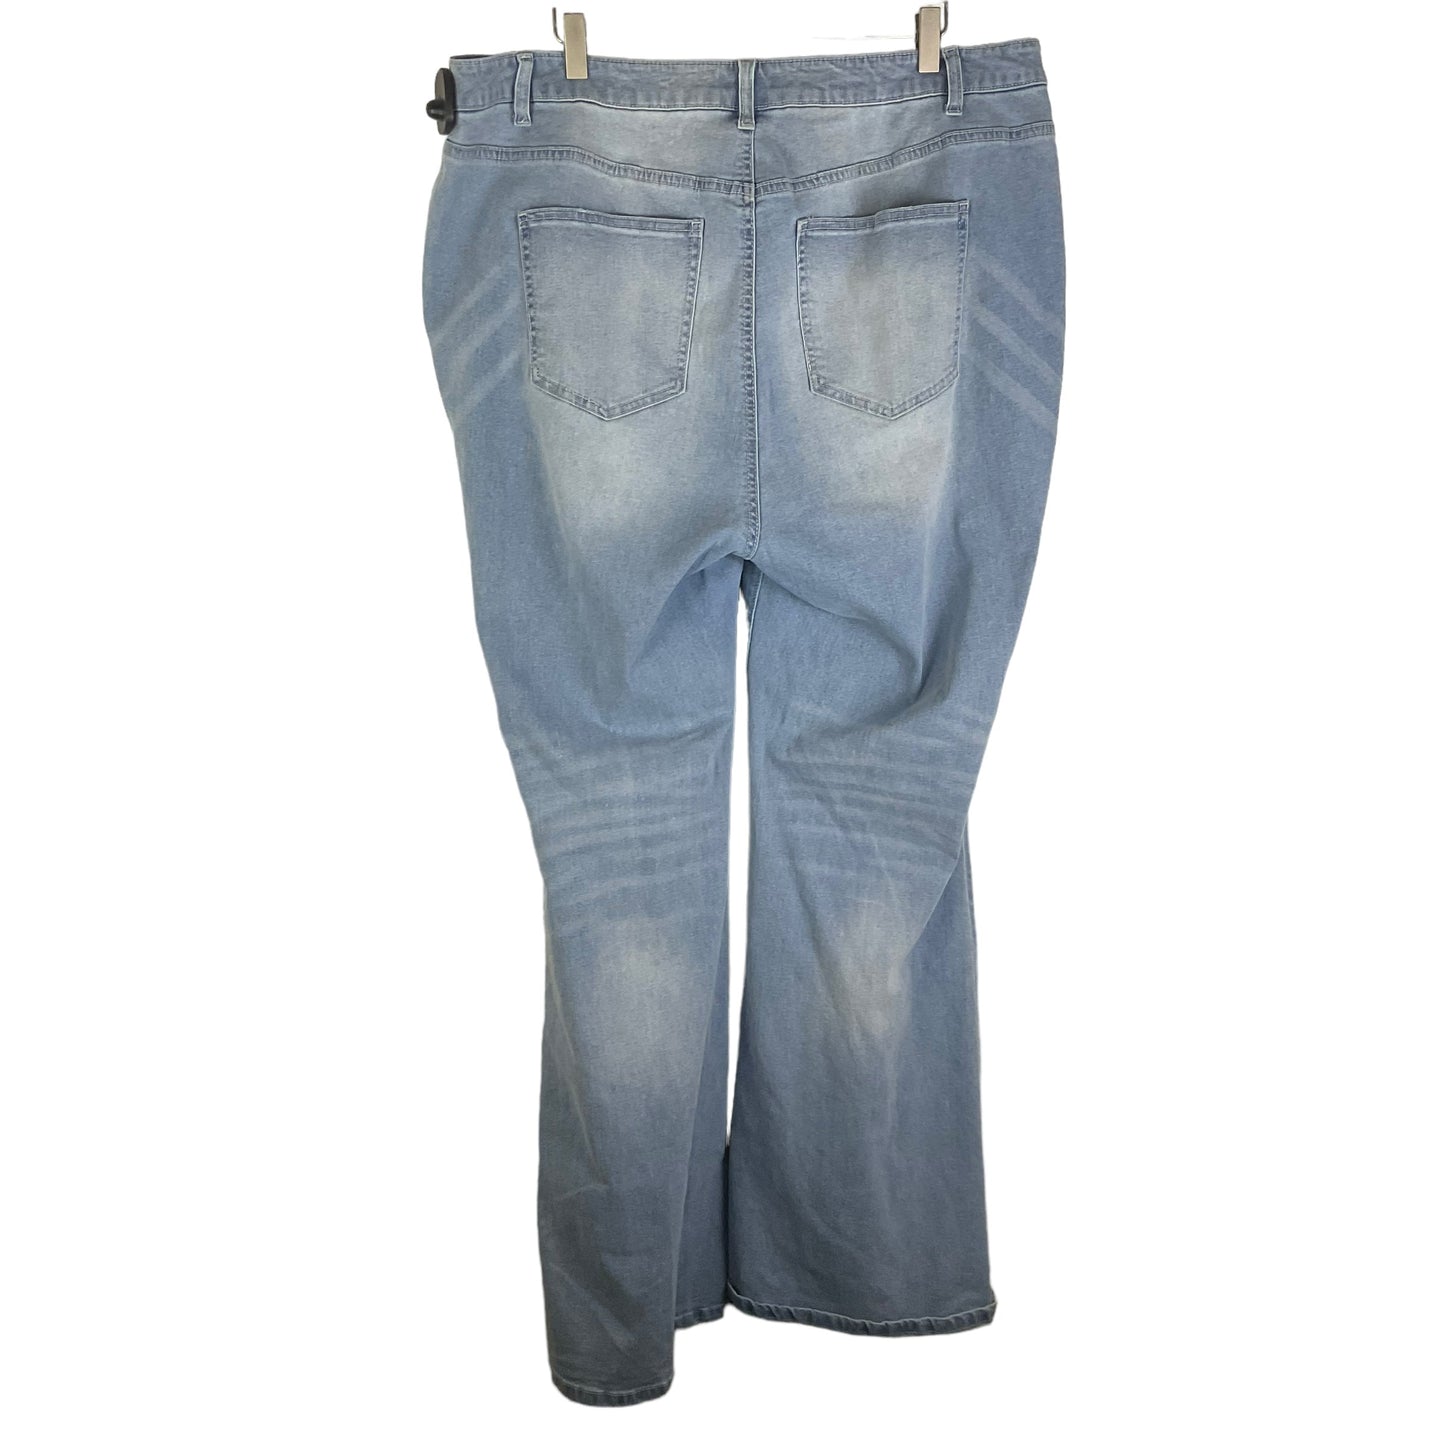 Jeans Boot Cut By Clothes Mentor  Size: 24